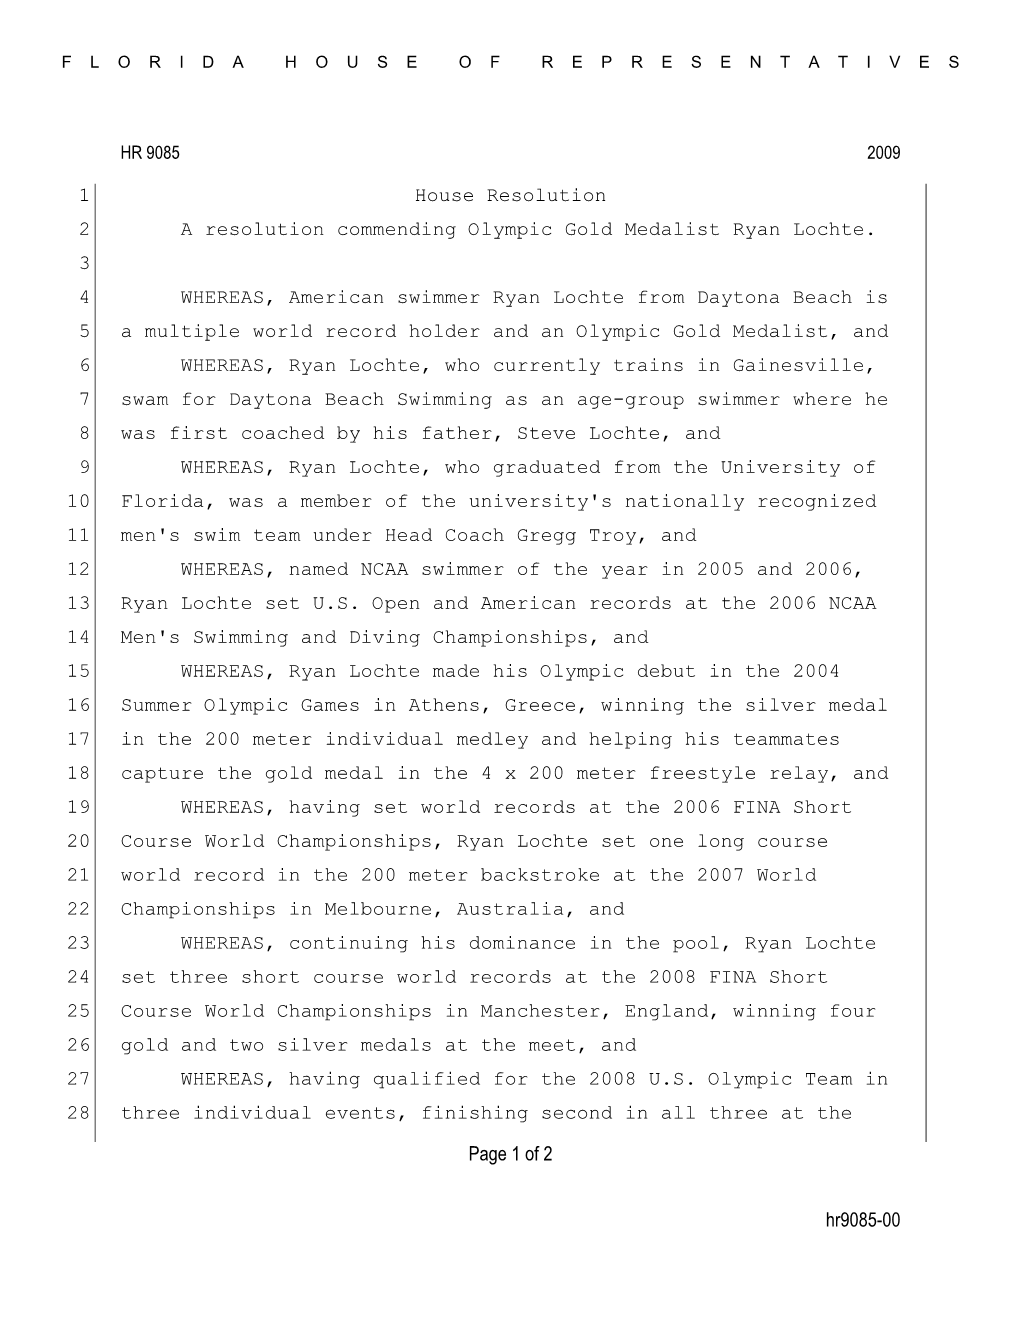 Hr9085-00 Page 1 of 2 House Resolution 1 A